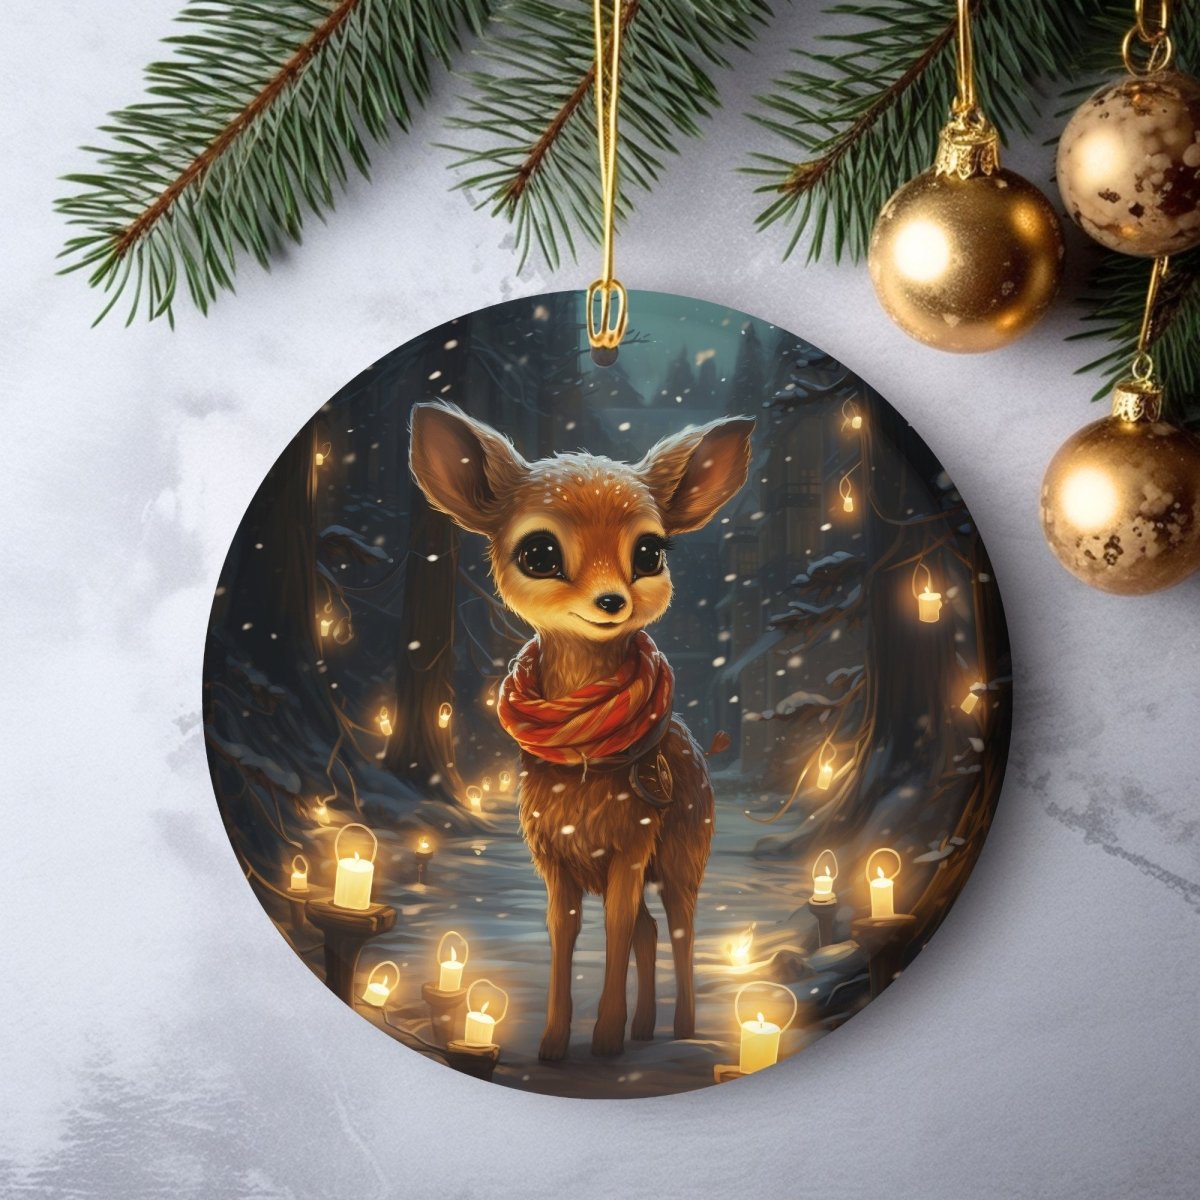 Christmas Animal Ornament Set of 20 Round Ceramic Ornaments with Wonderful Watercolor Animal Designs Festive Christmas Tree Decoration - Everything Pixel